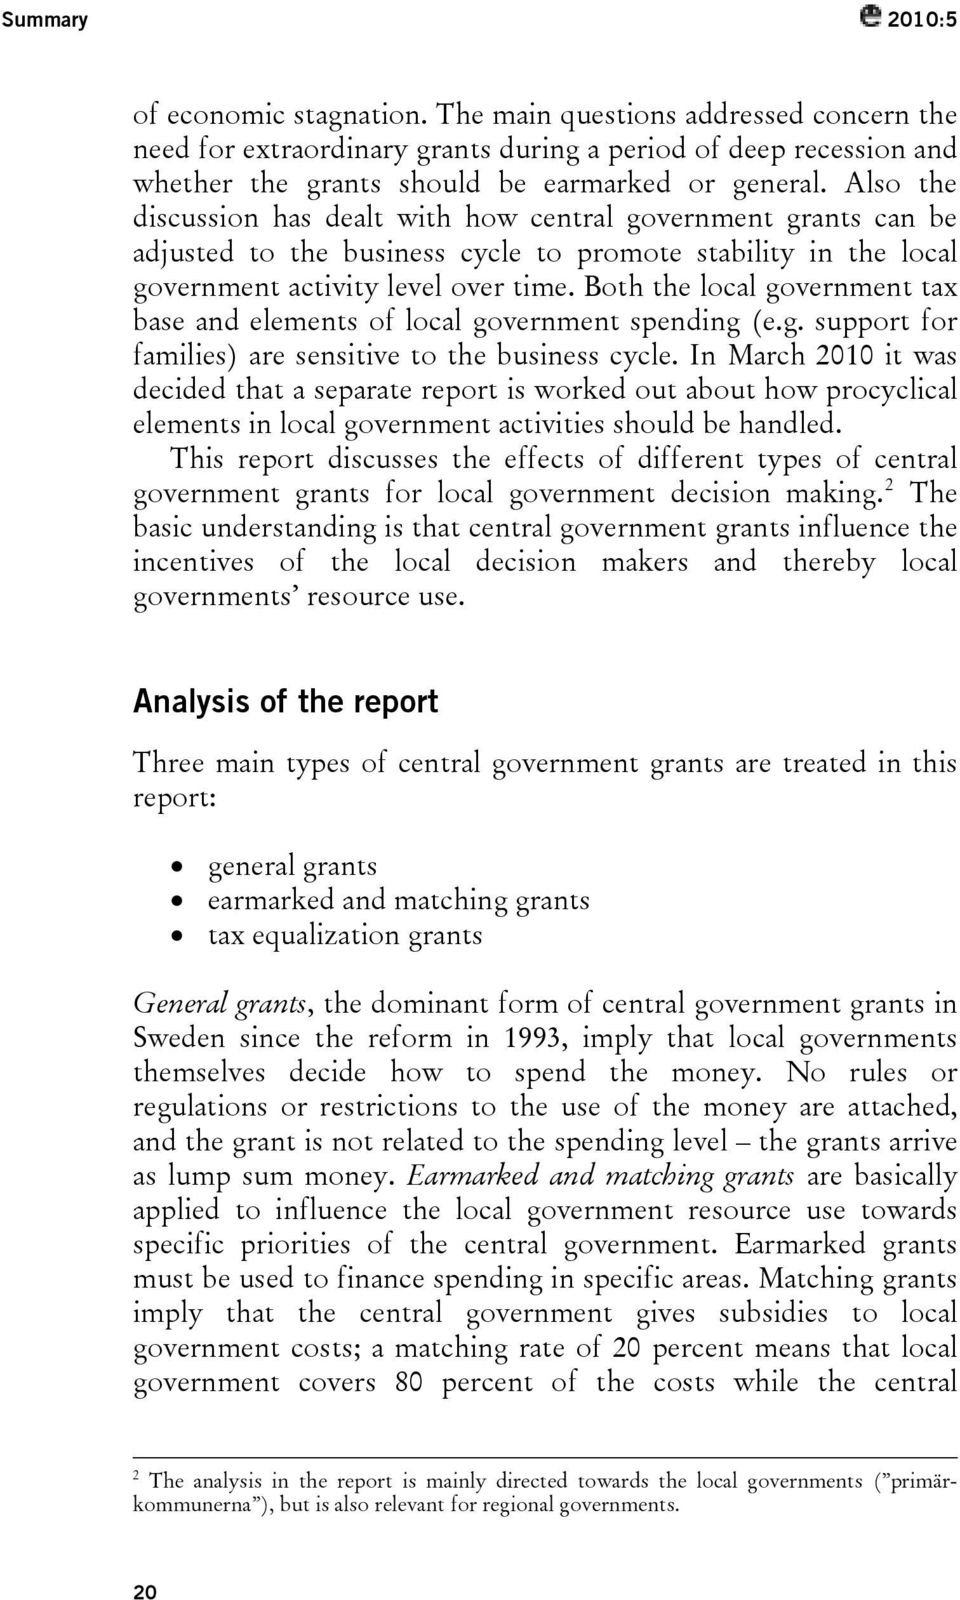 Both the local government tax base and elements of local government spending (e.g. support for families) are sensitive to the business cycle.